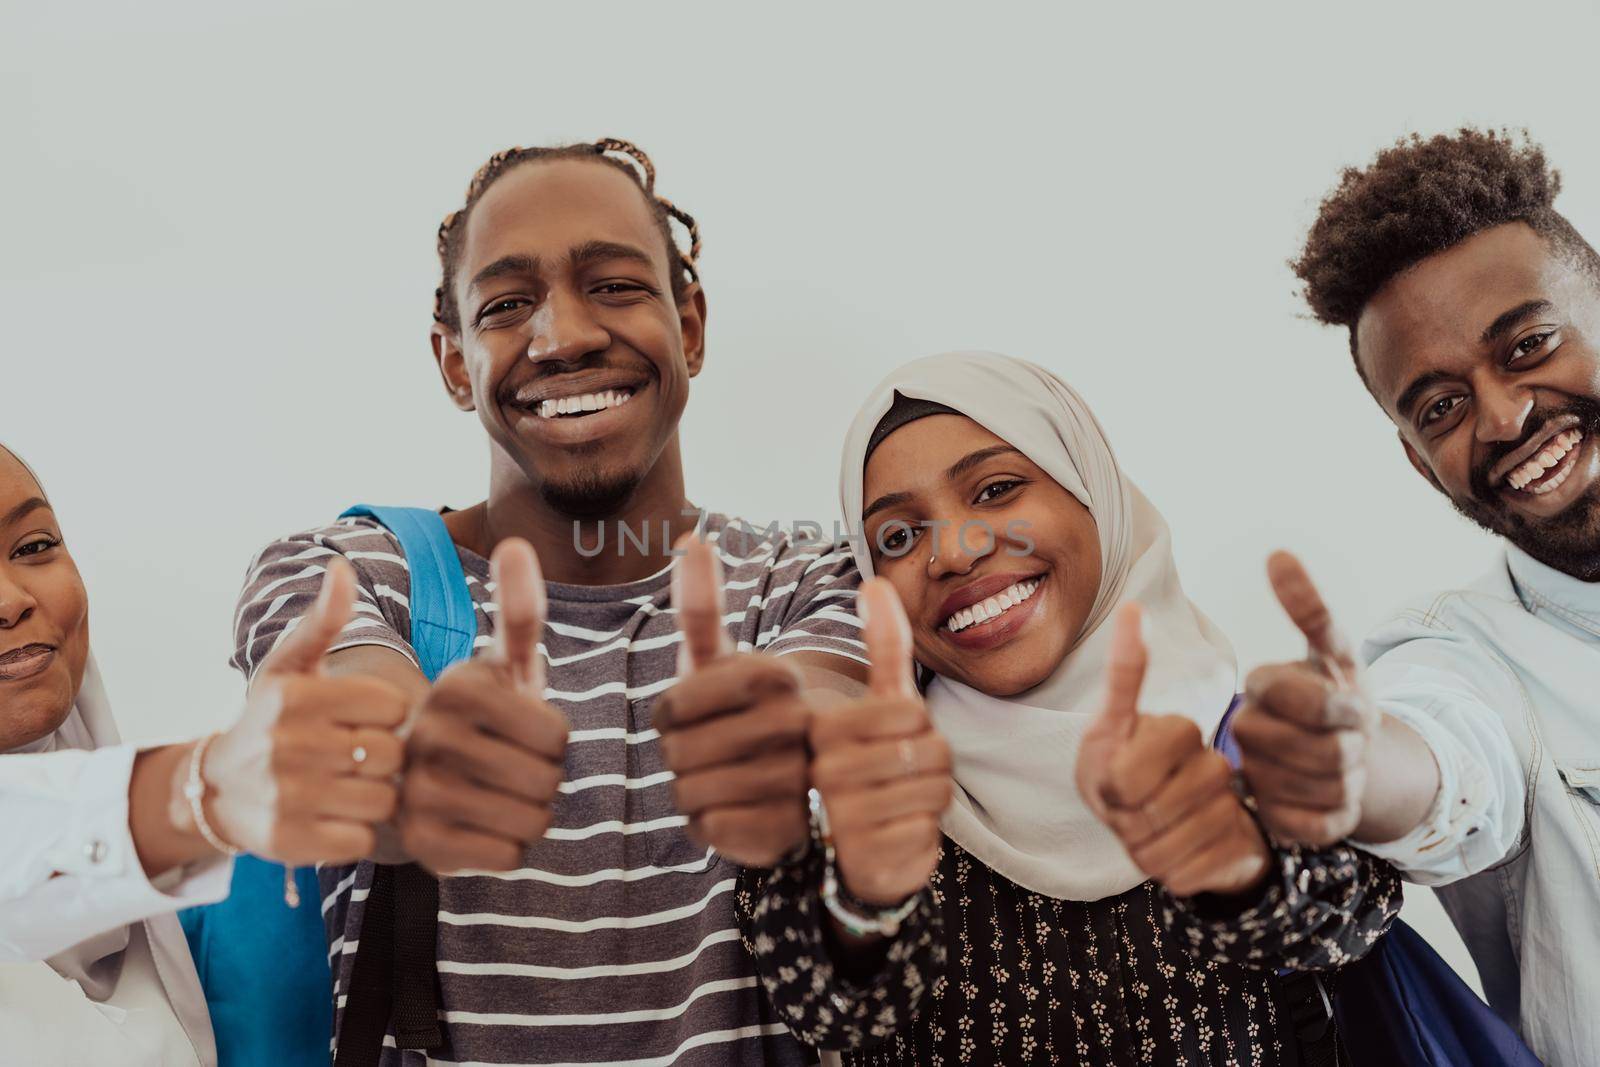 Group portrait of happy African students standing together against a white background and showing ok sign thumbs up girls wearing traditional Sudan Muslim hijab fashion by dotshock